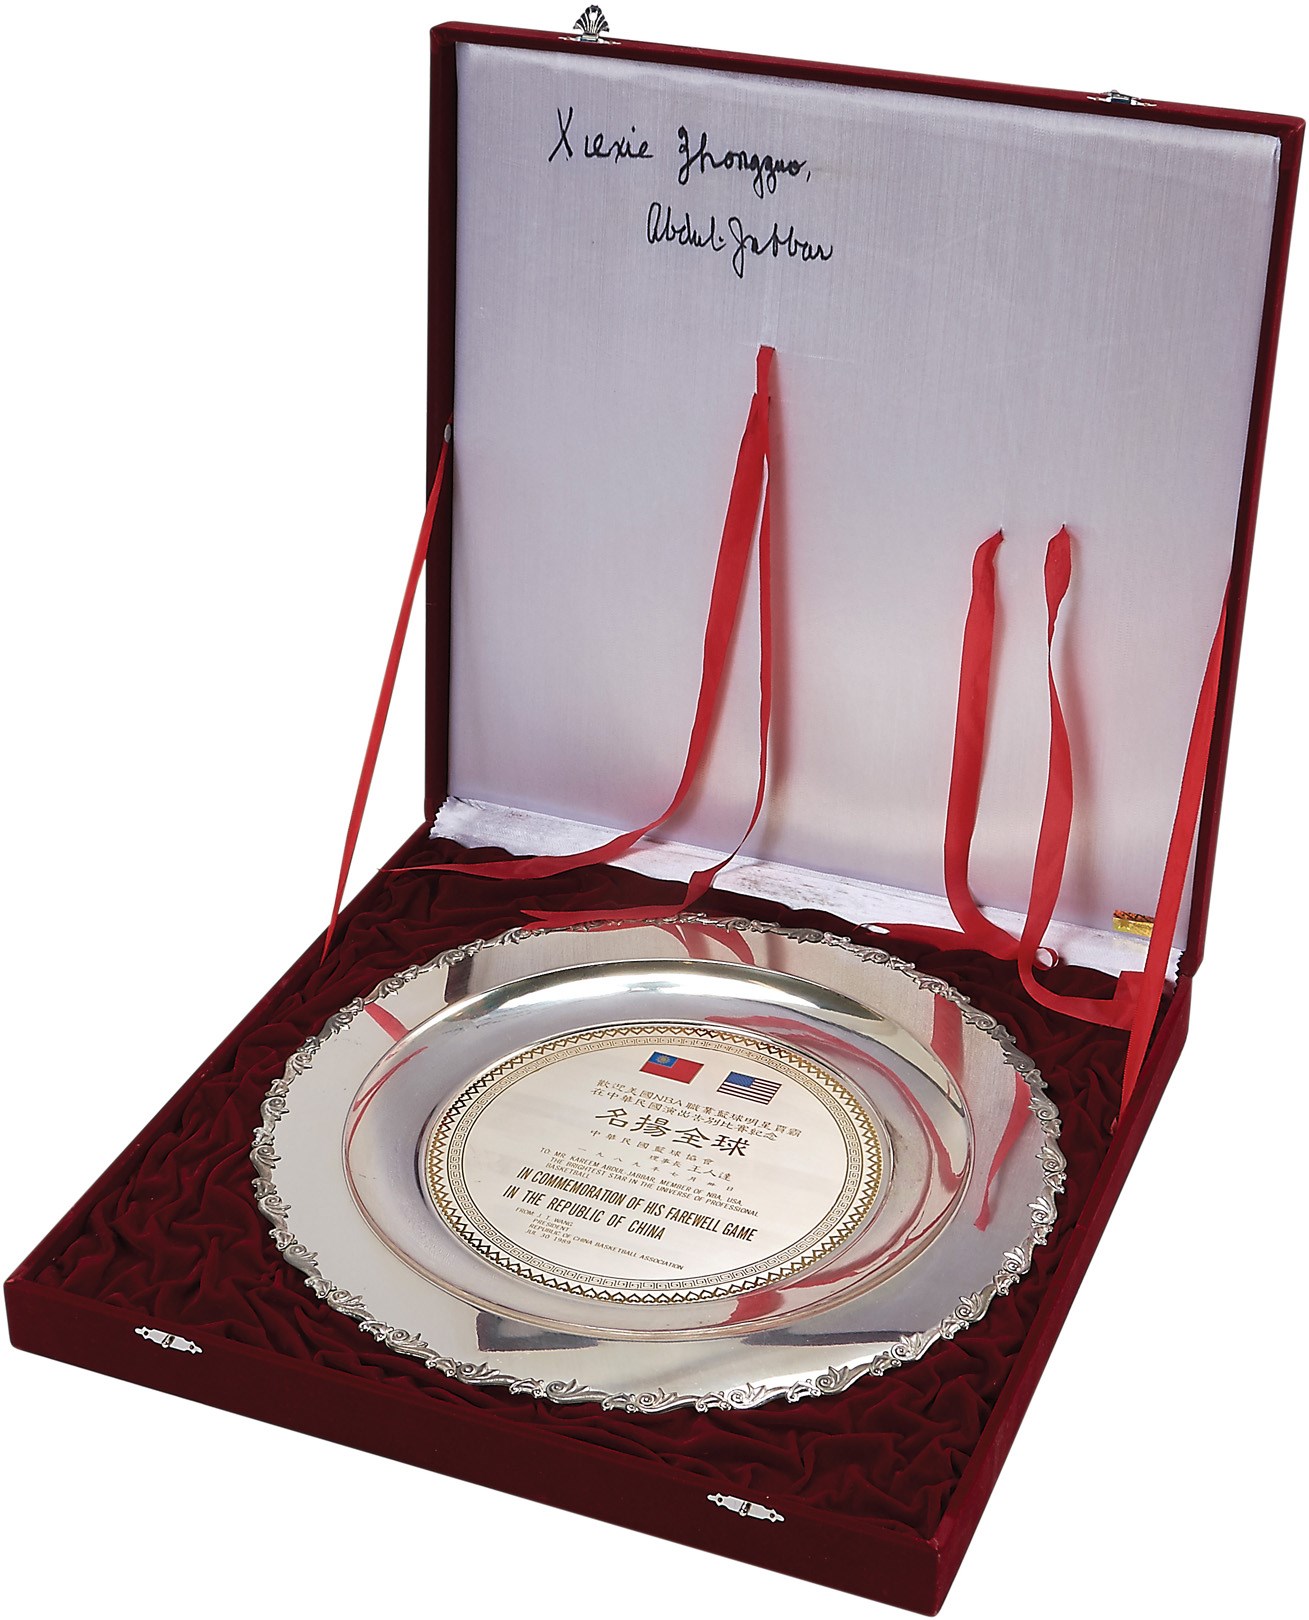 1989 Kareem Abdul-Jabbar Silver Charger Presented By The People's Republic of China (Jabbar COA - Signed In Chinese)